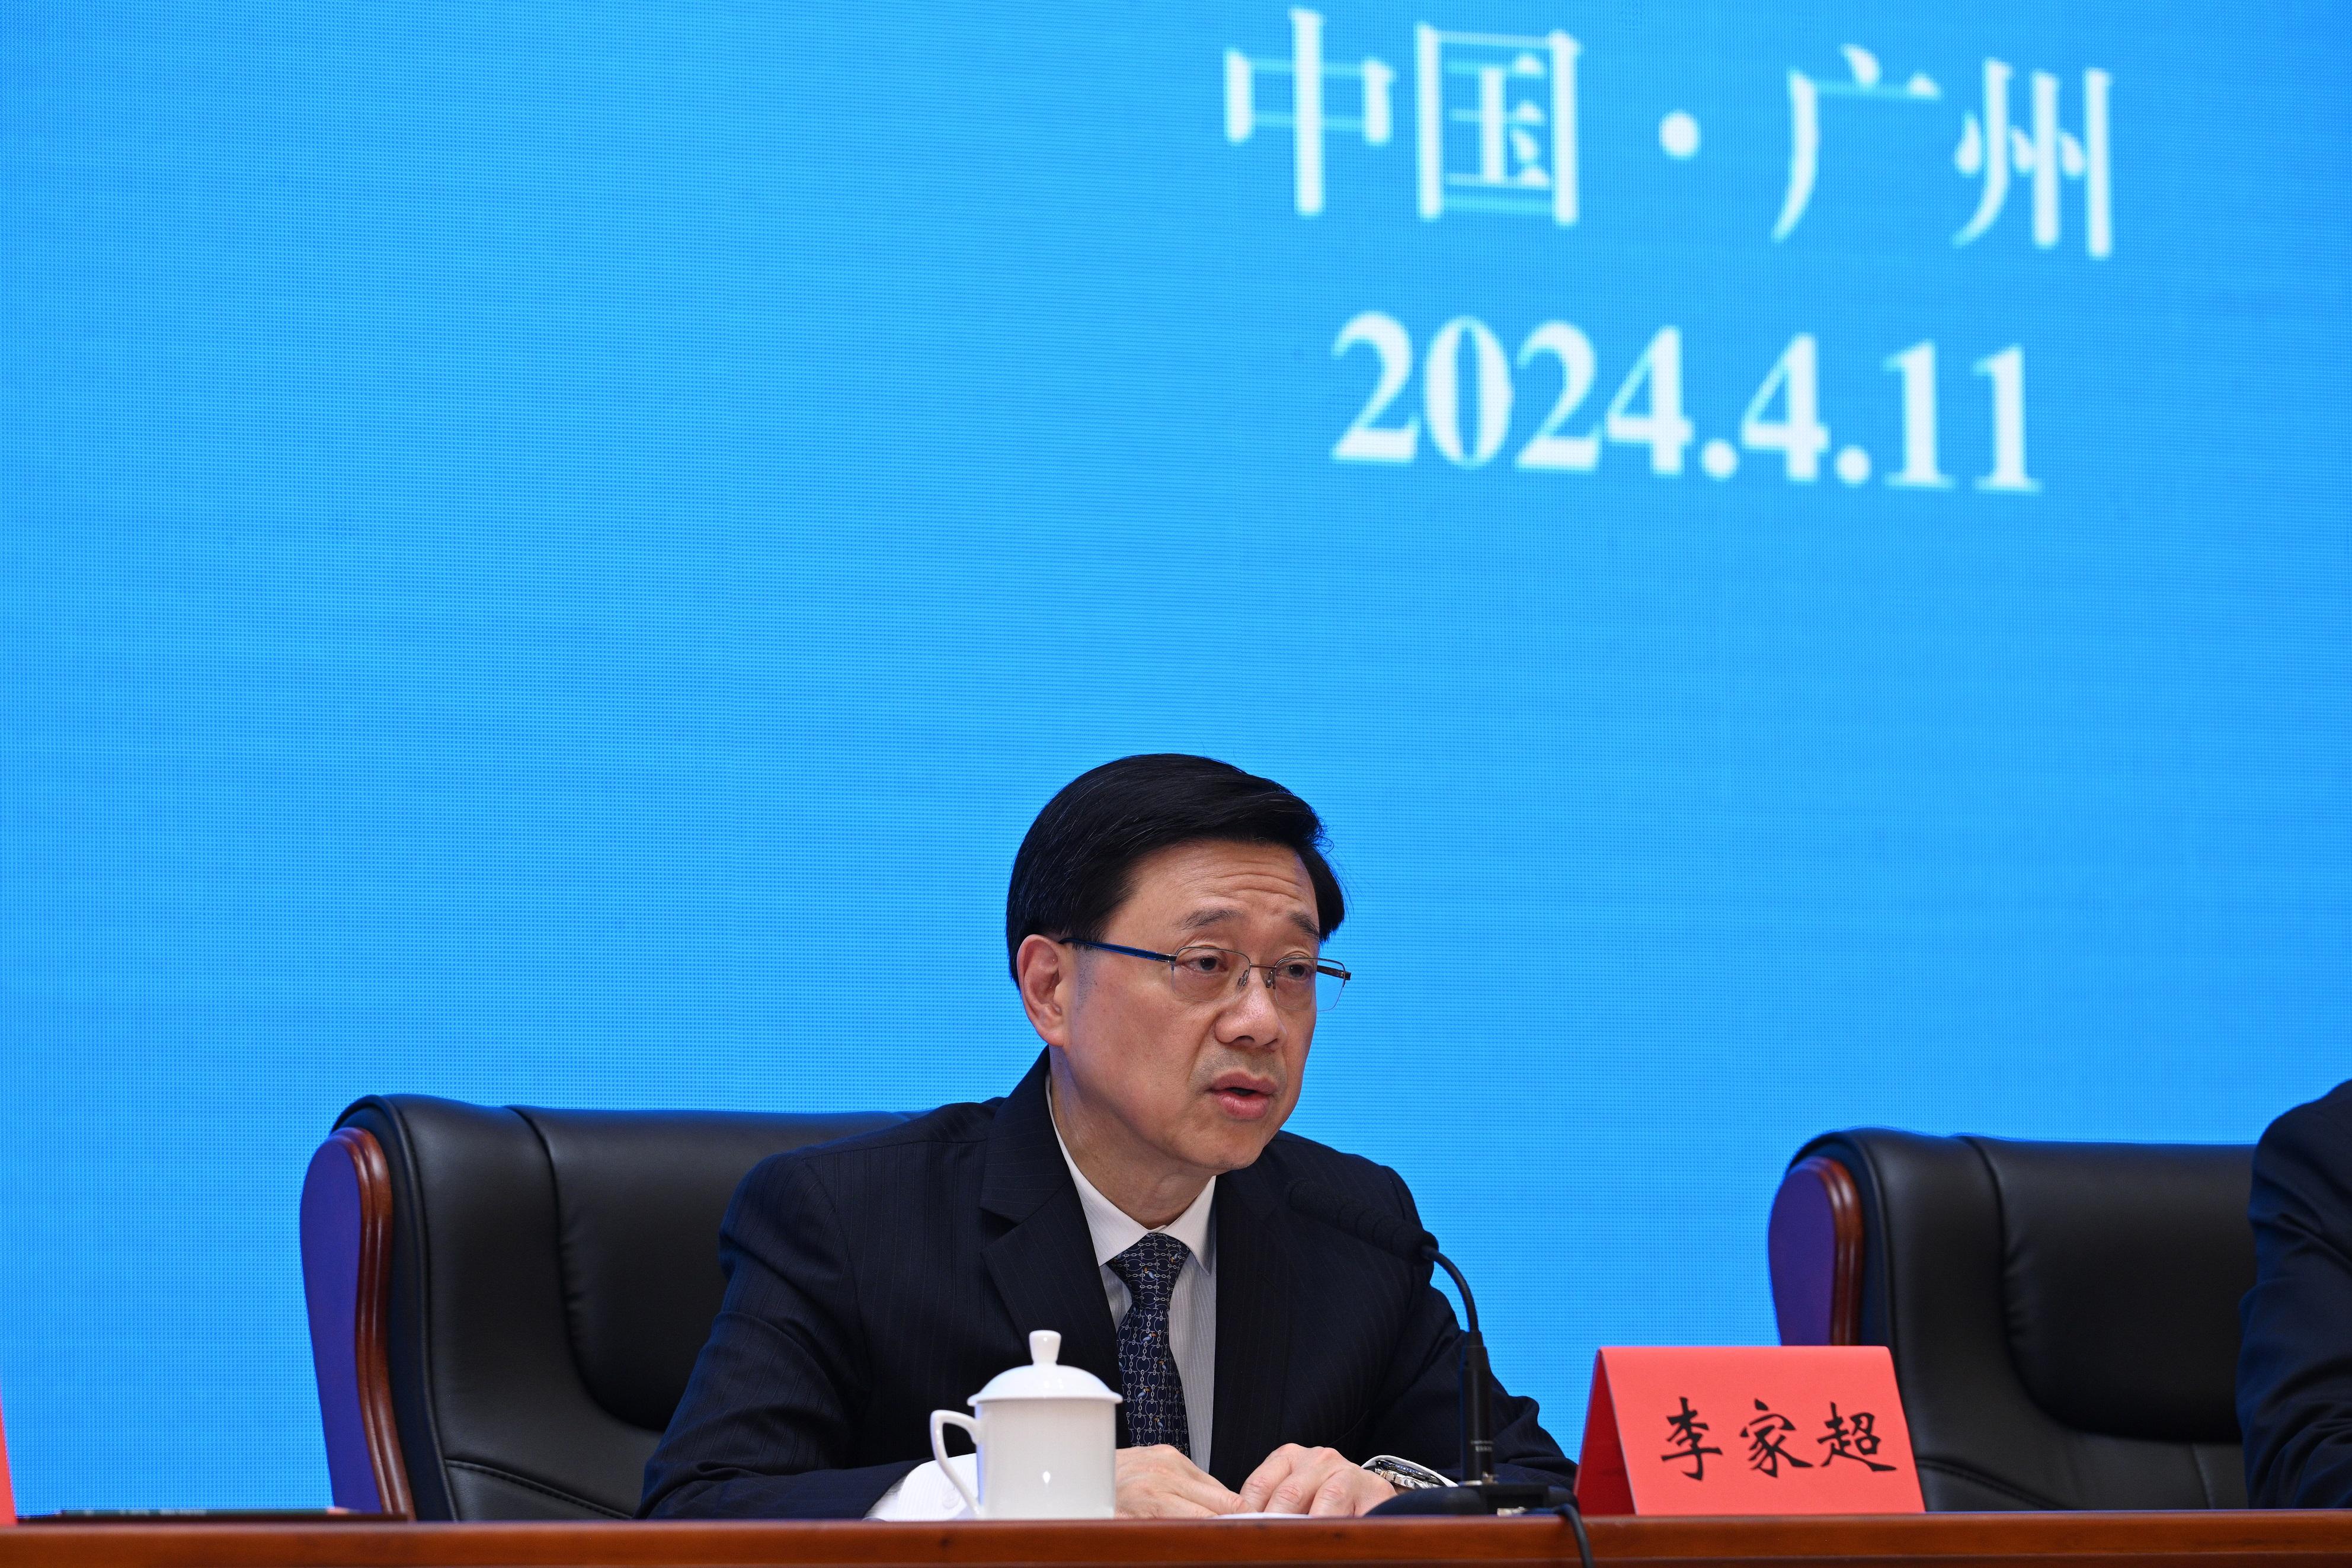 The Chief Executive, Mr John Lee, attended the inaugural meeting of the Organising Committee of the 15th National Games and the inaugural meeting of the Organising Committee of the 12th National Games for Persons with Disabilities and the 9th National Special Olympic Games in Guangzhou today (April 11). Photo shows Mr Lee speaking at the inaugural meeting of the Organising Committee of the 15th National Games. 